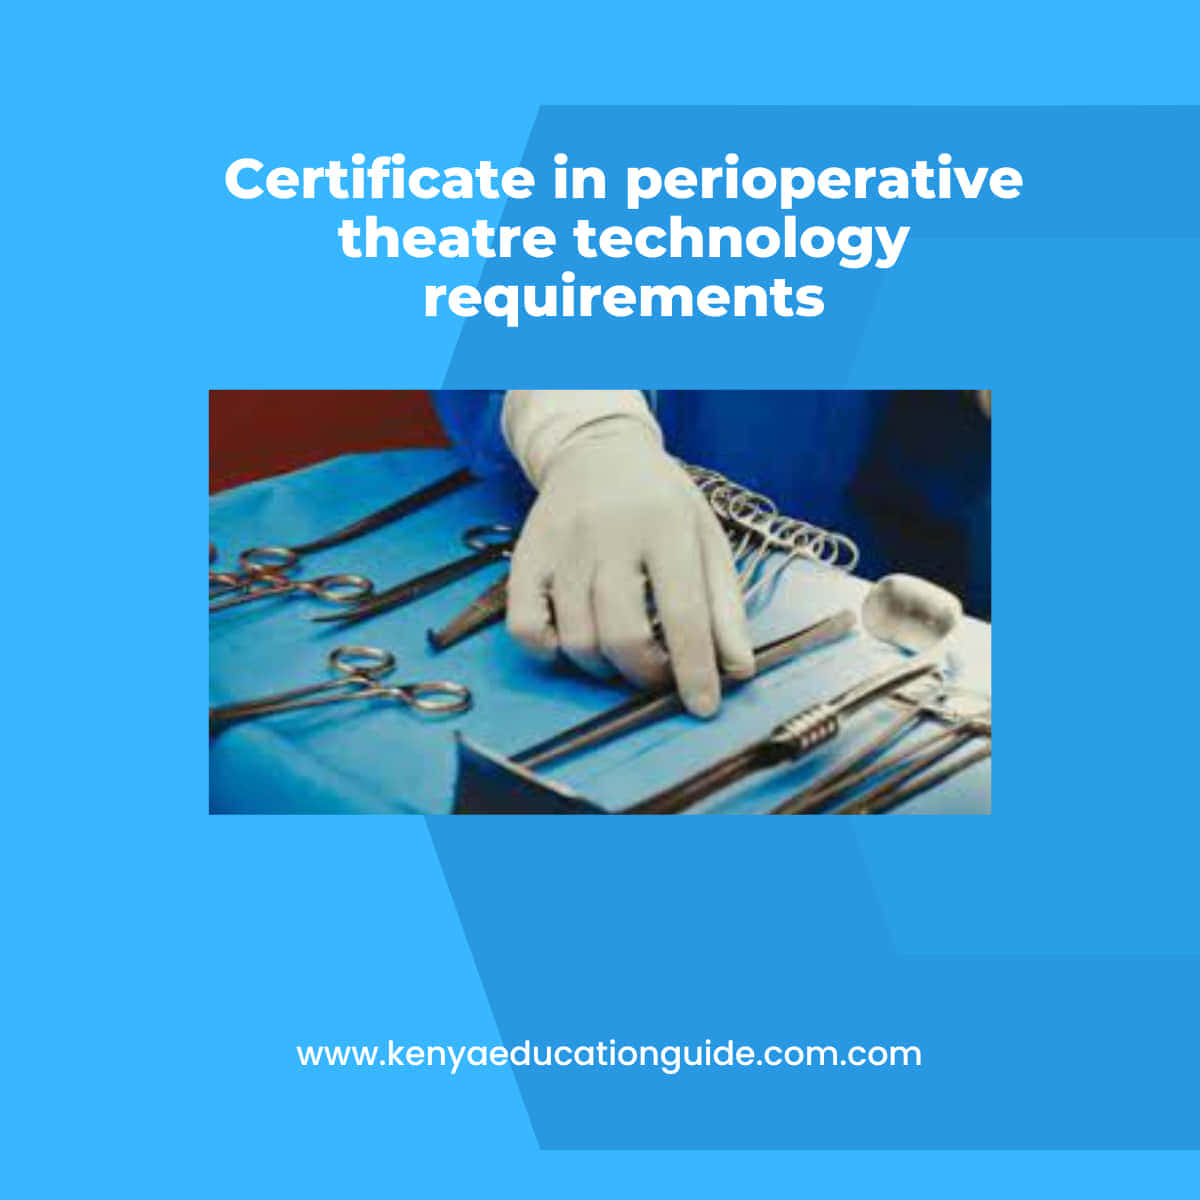 Certificate in perioperative theatre technology requirements